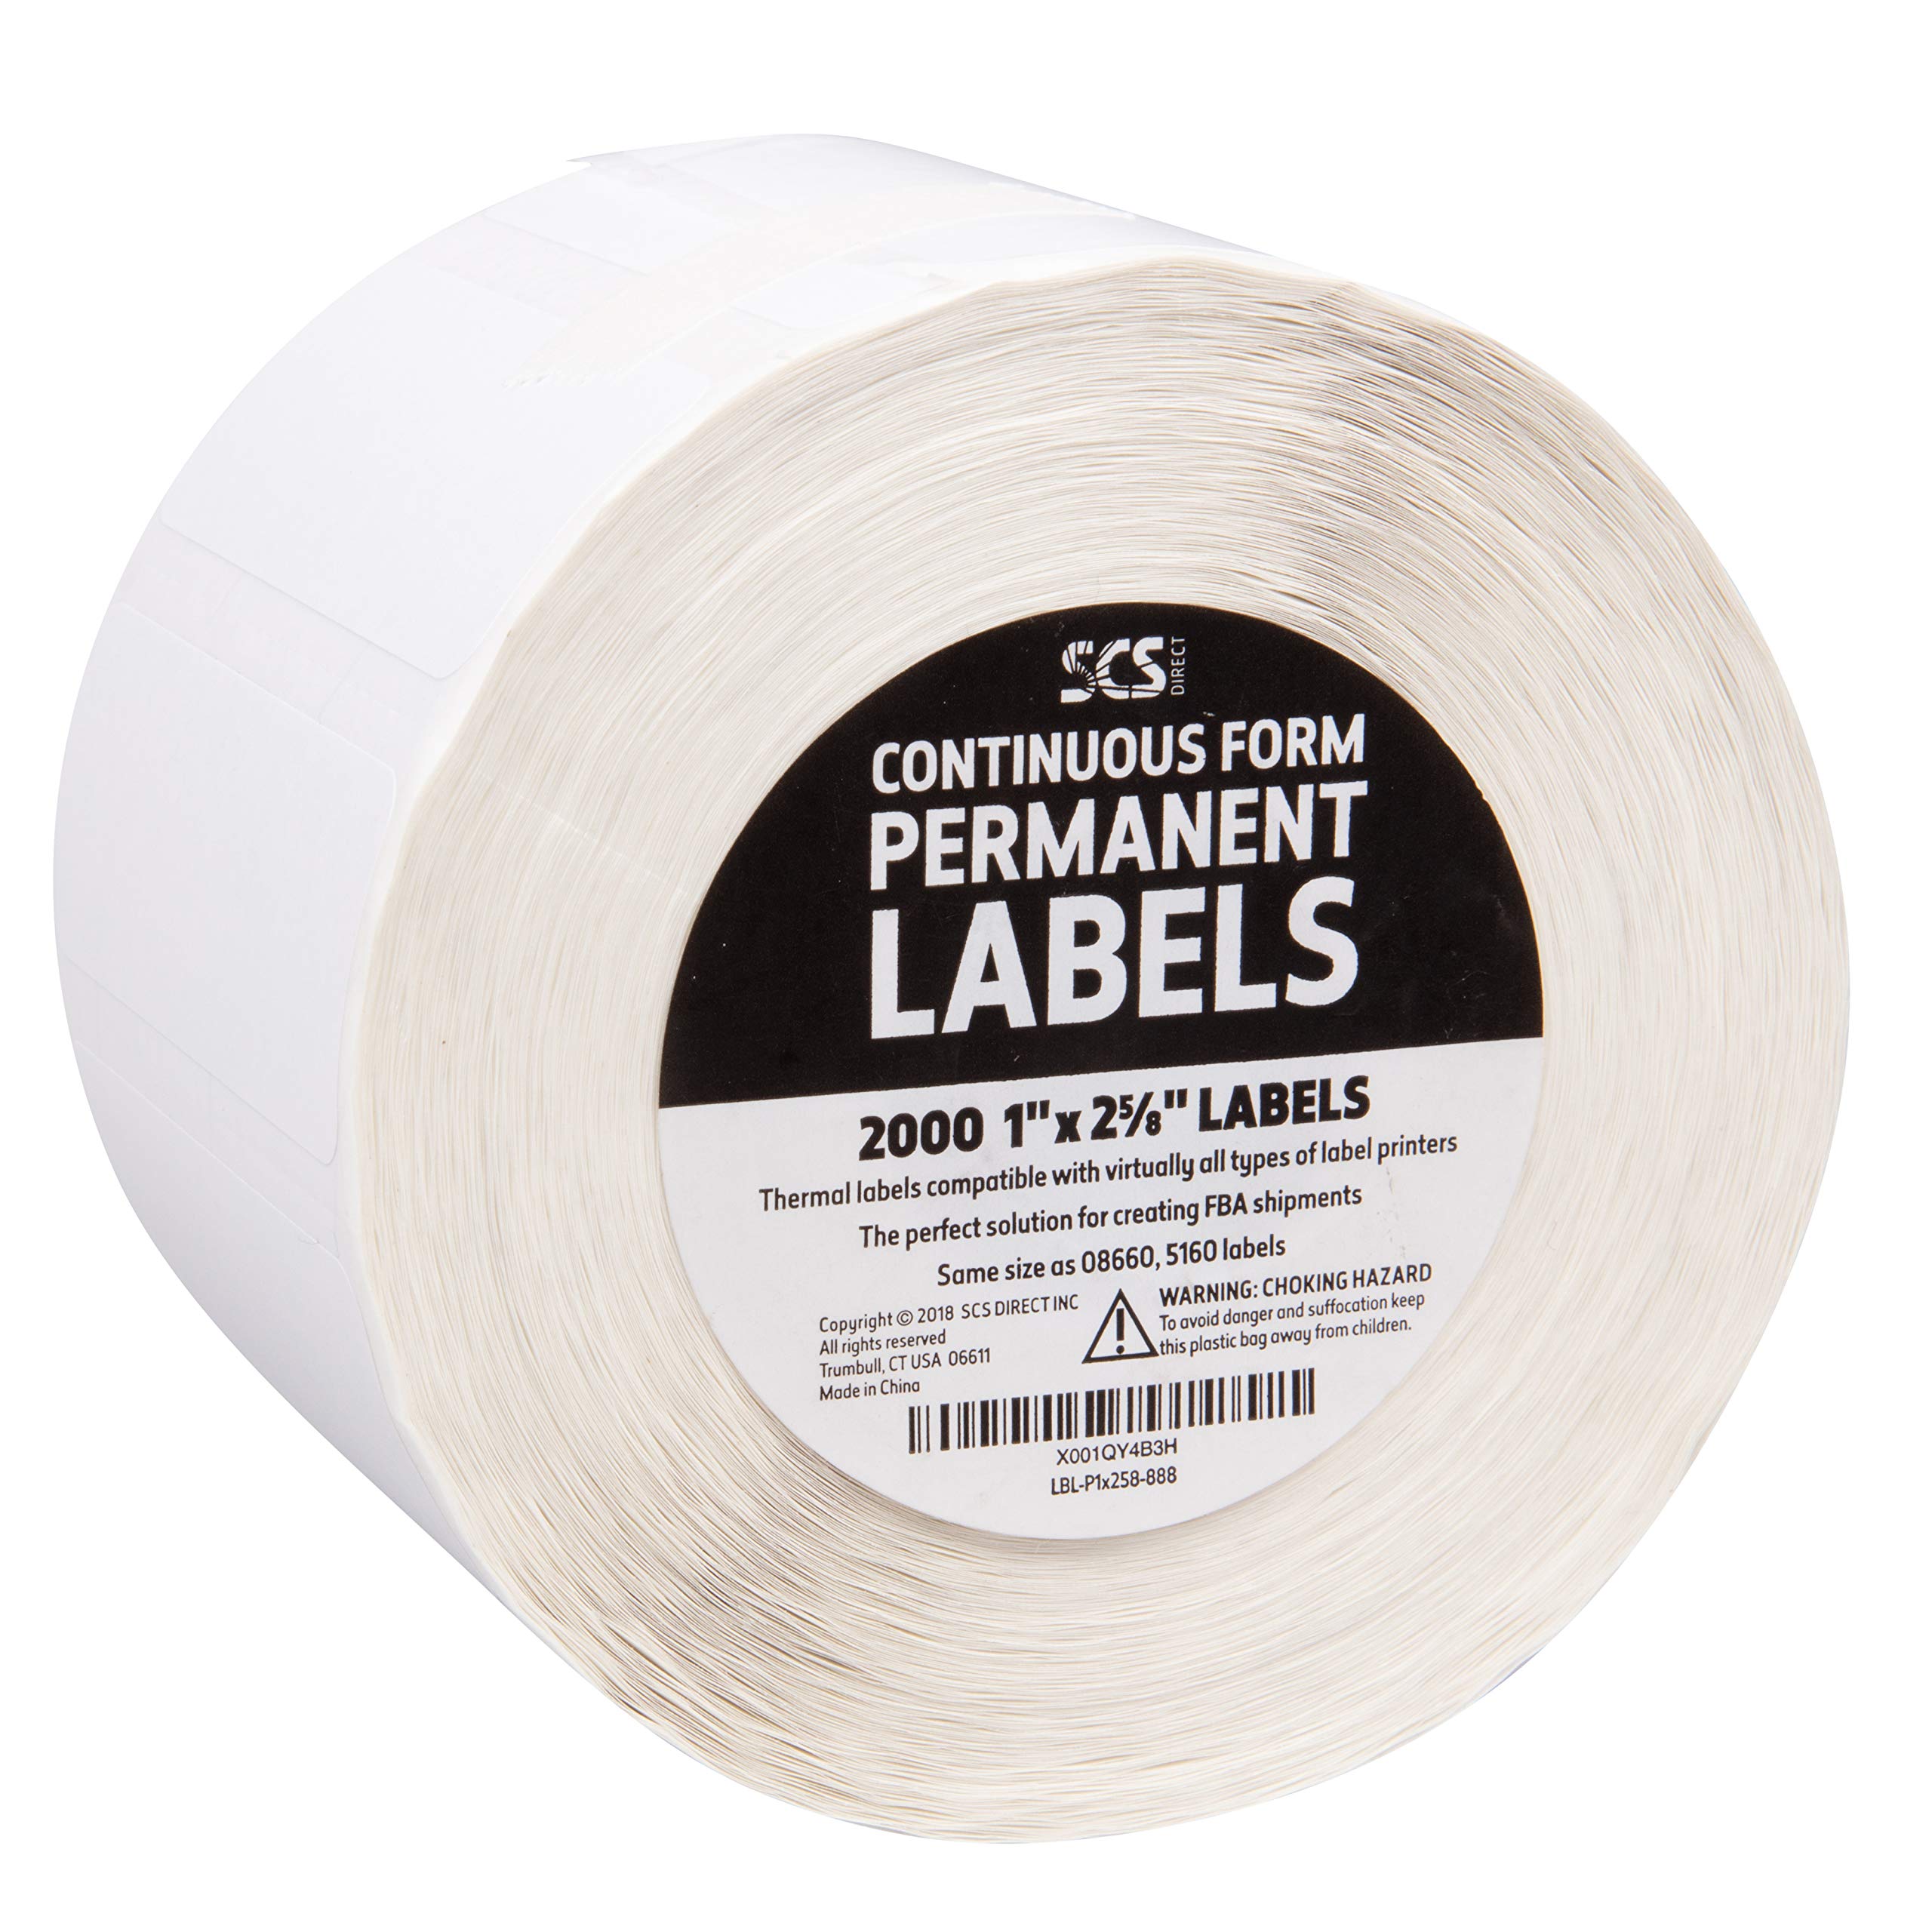 Thermal Label Printer Roll - 2000 (1" X 2 5/8") Shipping Labels